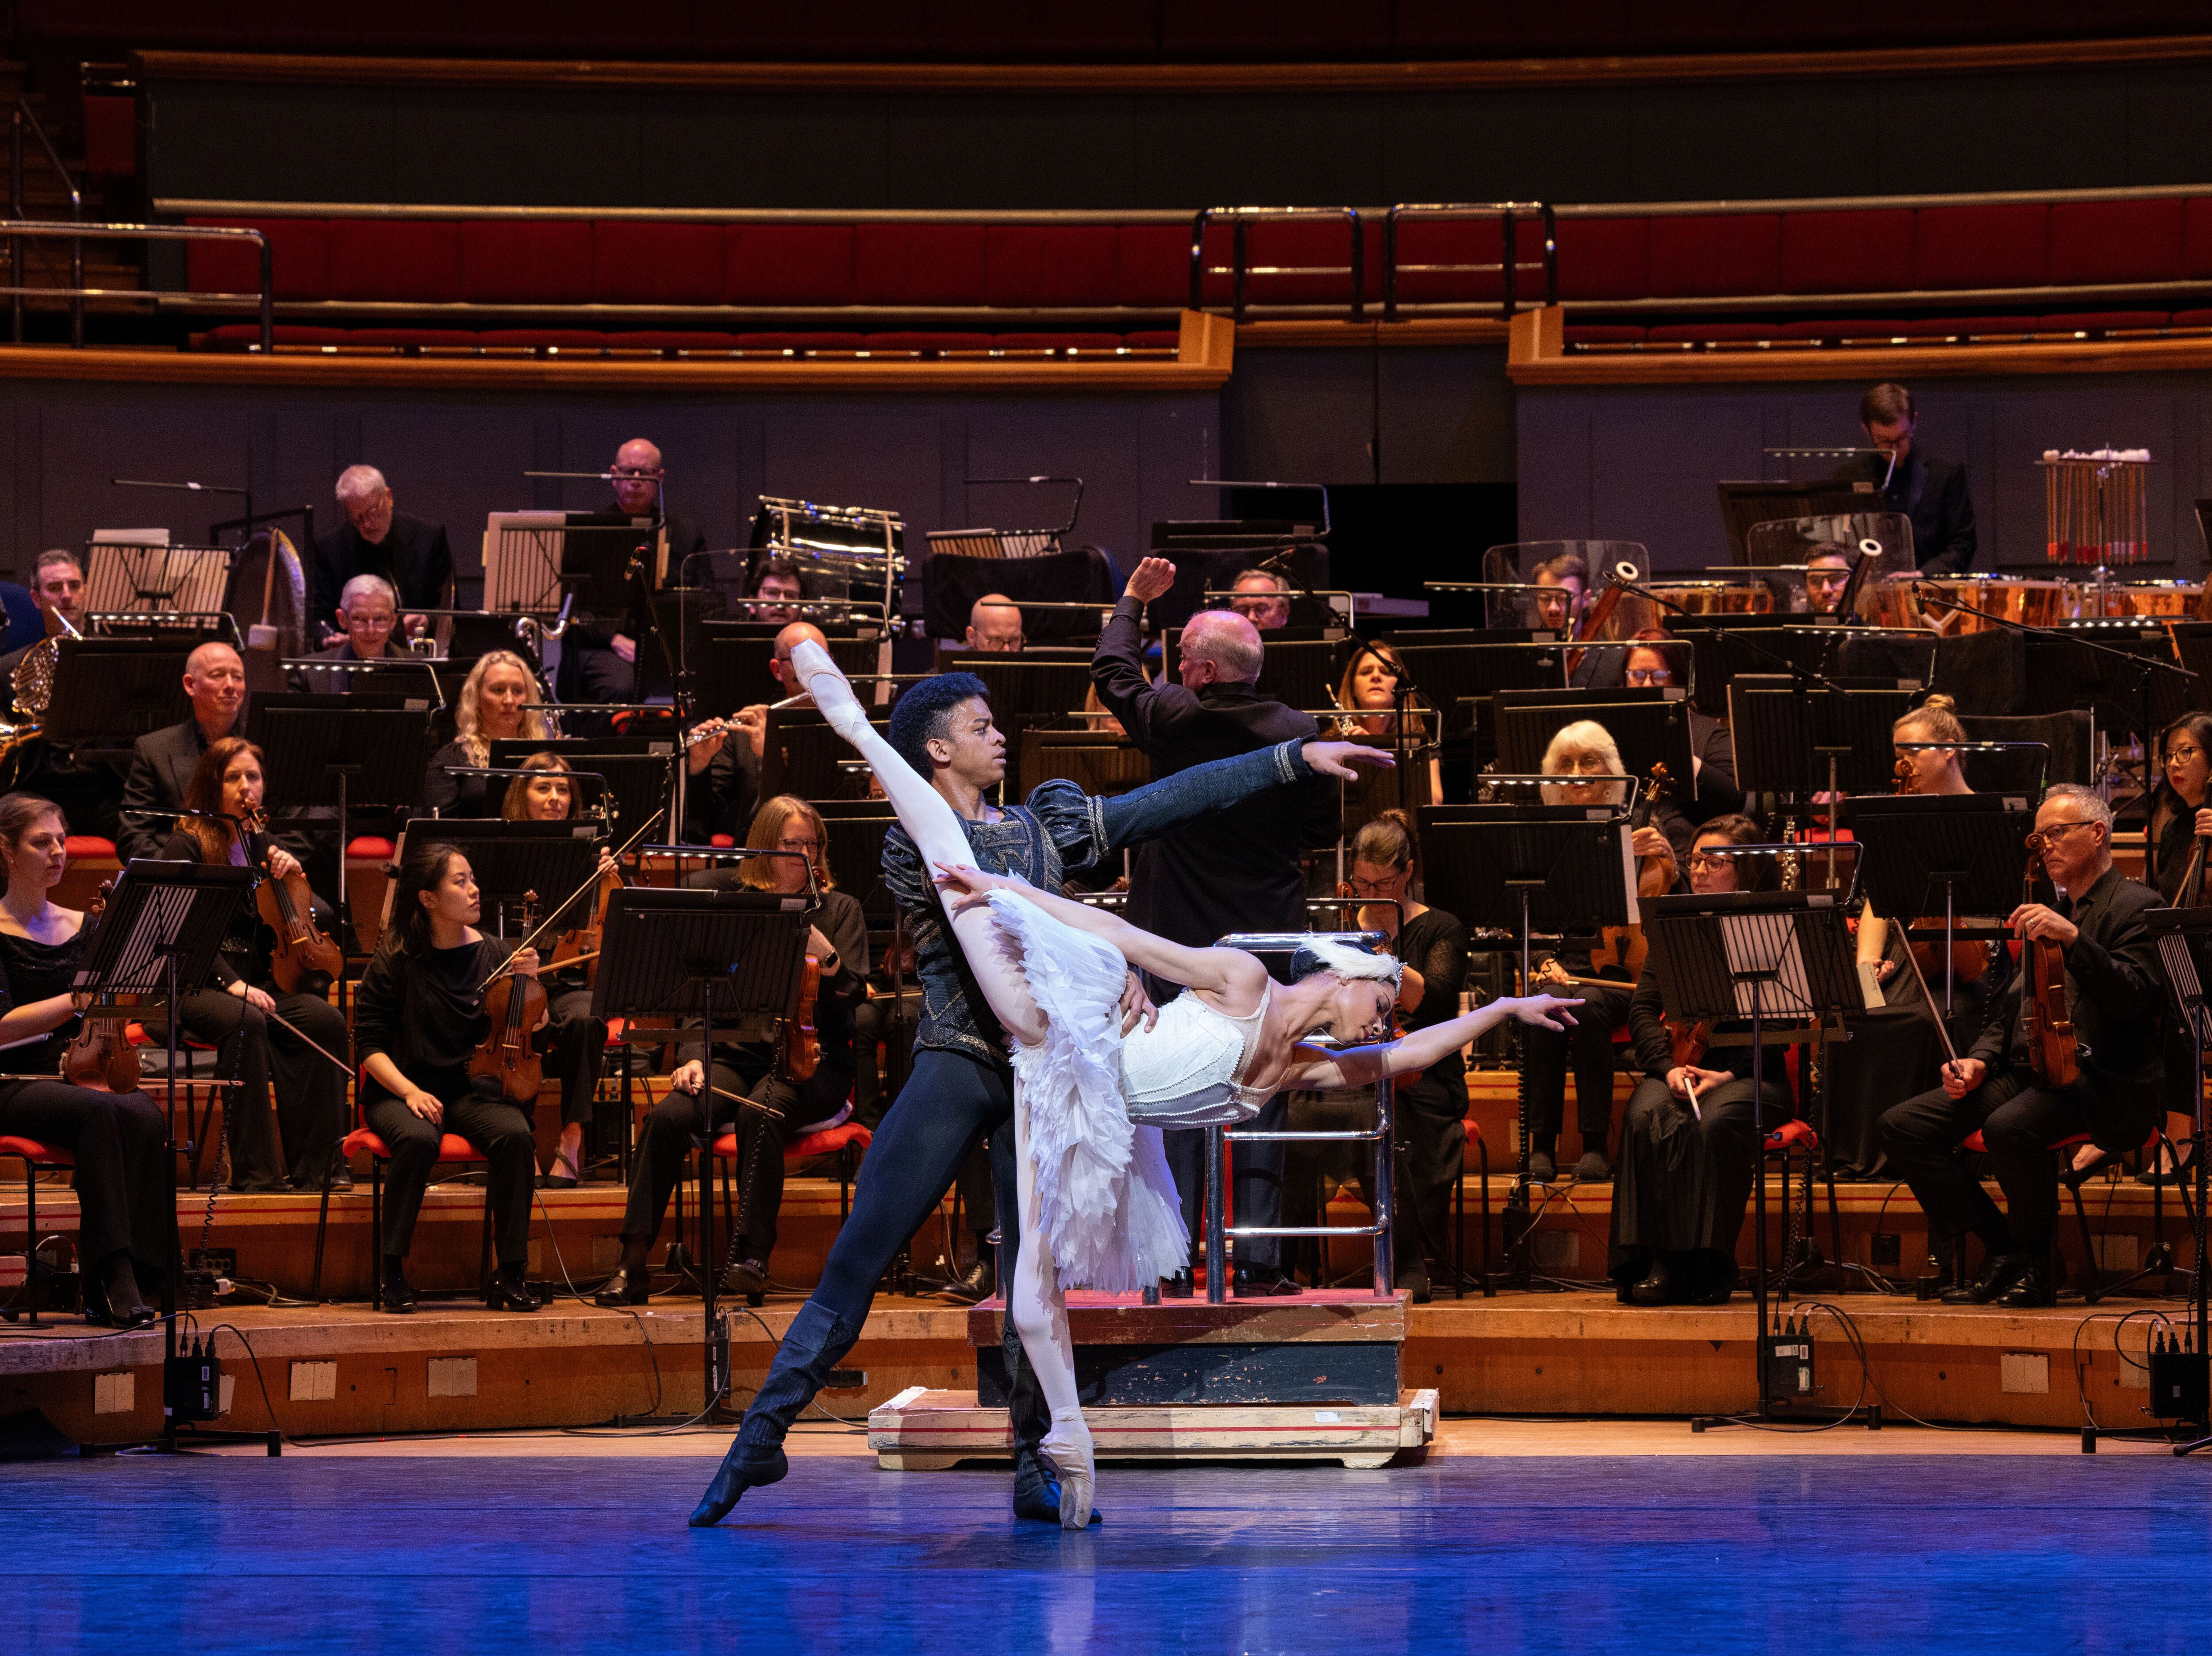 'A magical performance' - Our review of Birmingham Royal Ballet's Tchaikovsky Classics at Symphony Hall